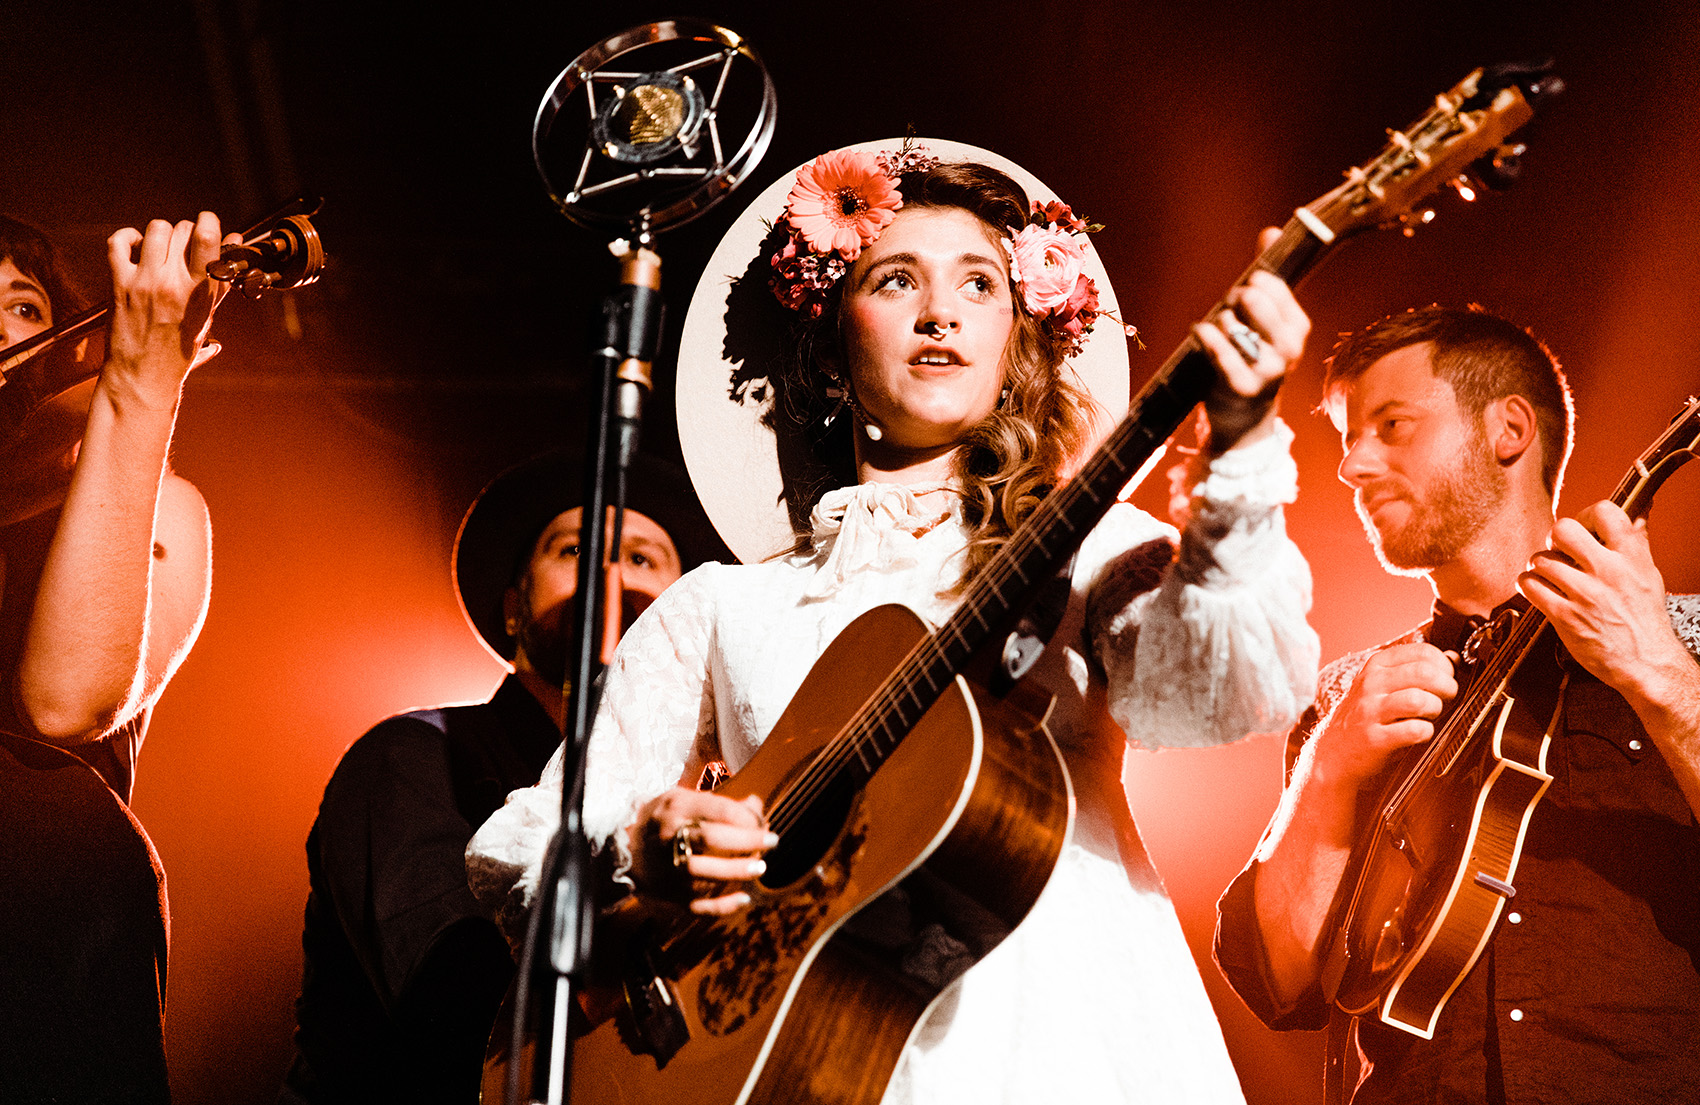 Woman dressed in a white dress with a hat and pink toned flowers in her hair playing guitar with band members behind her.